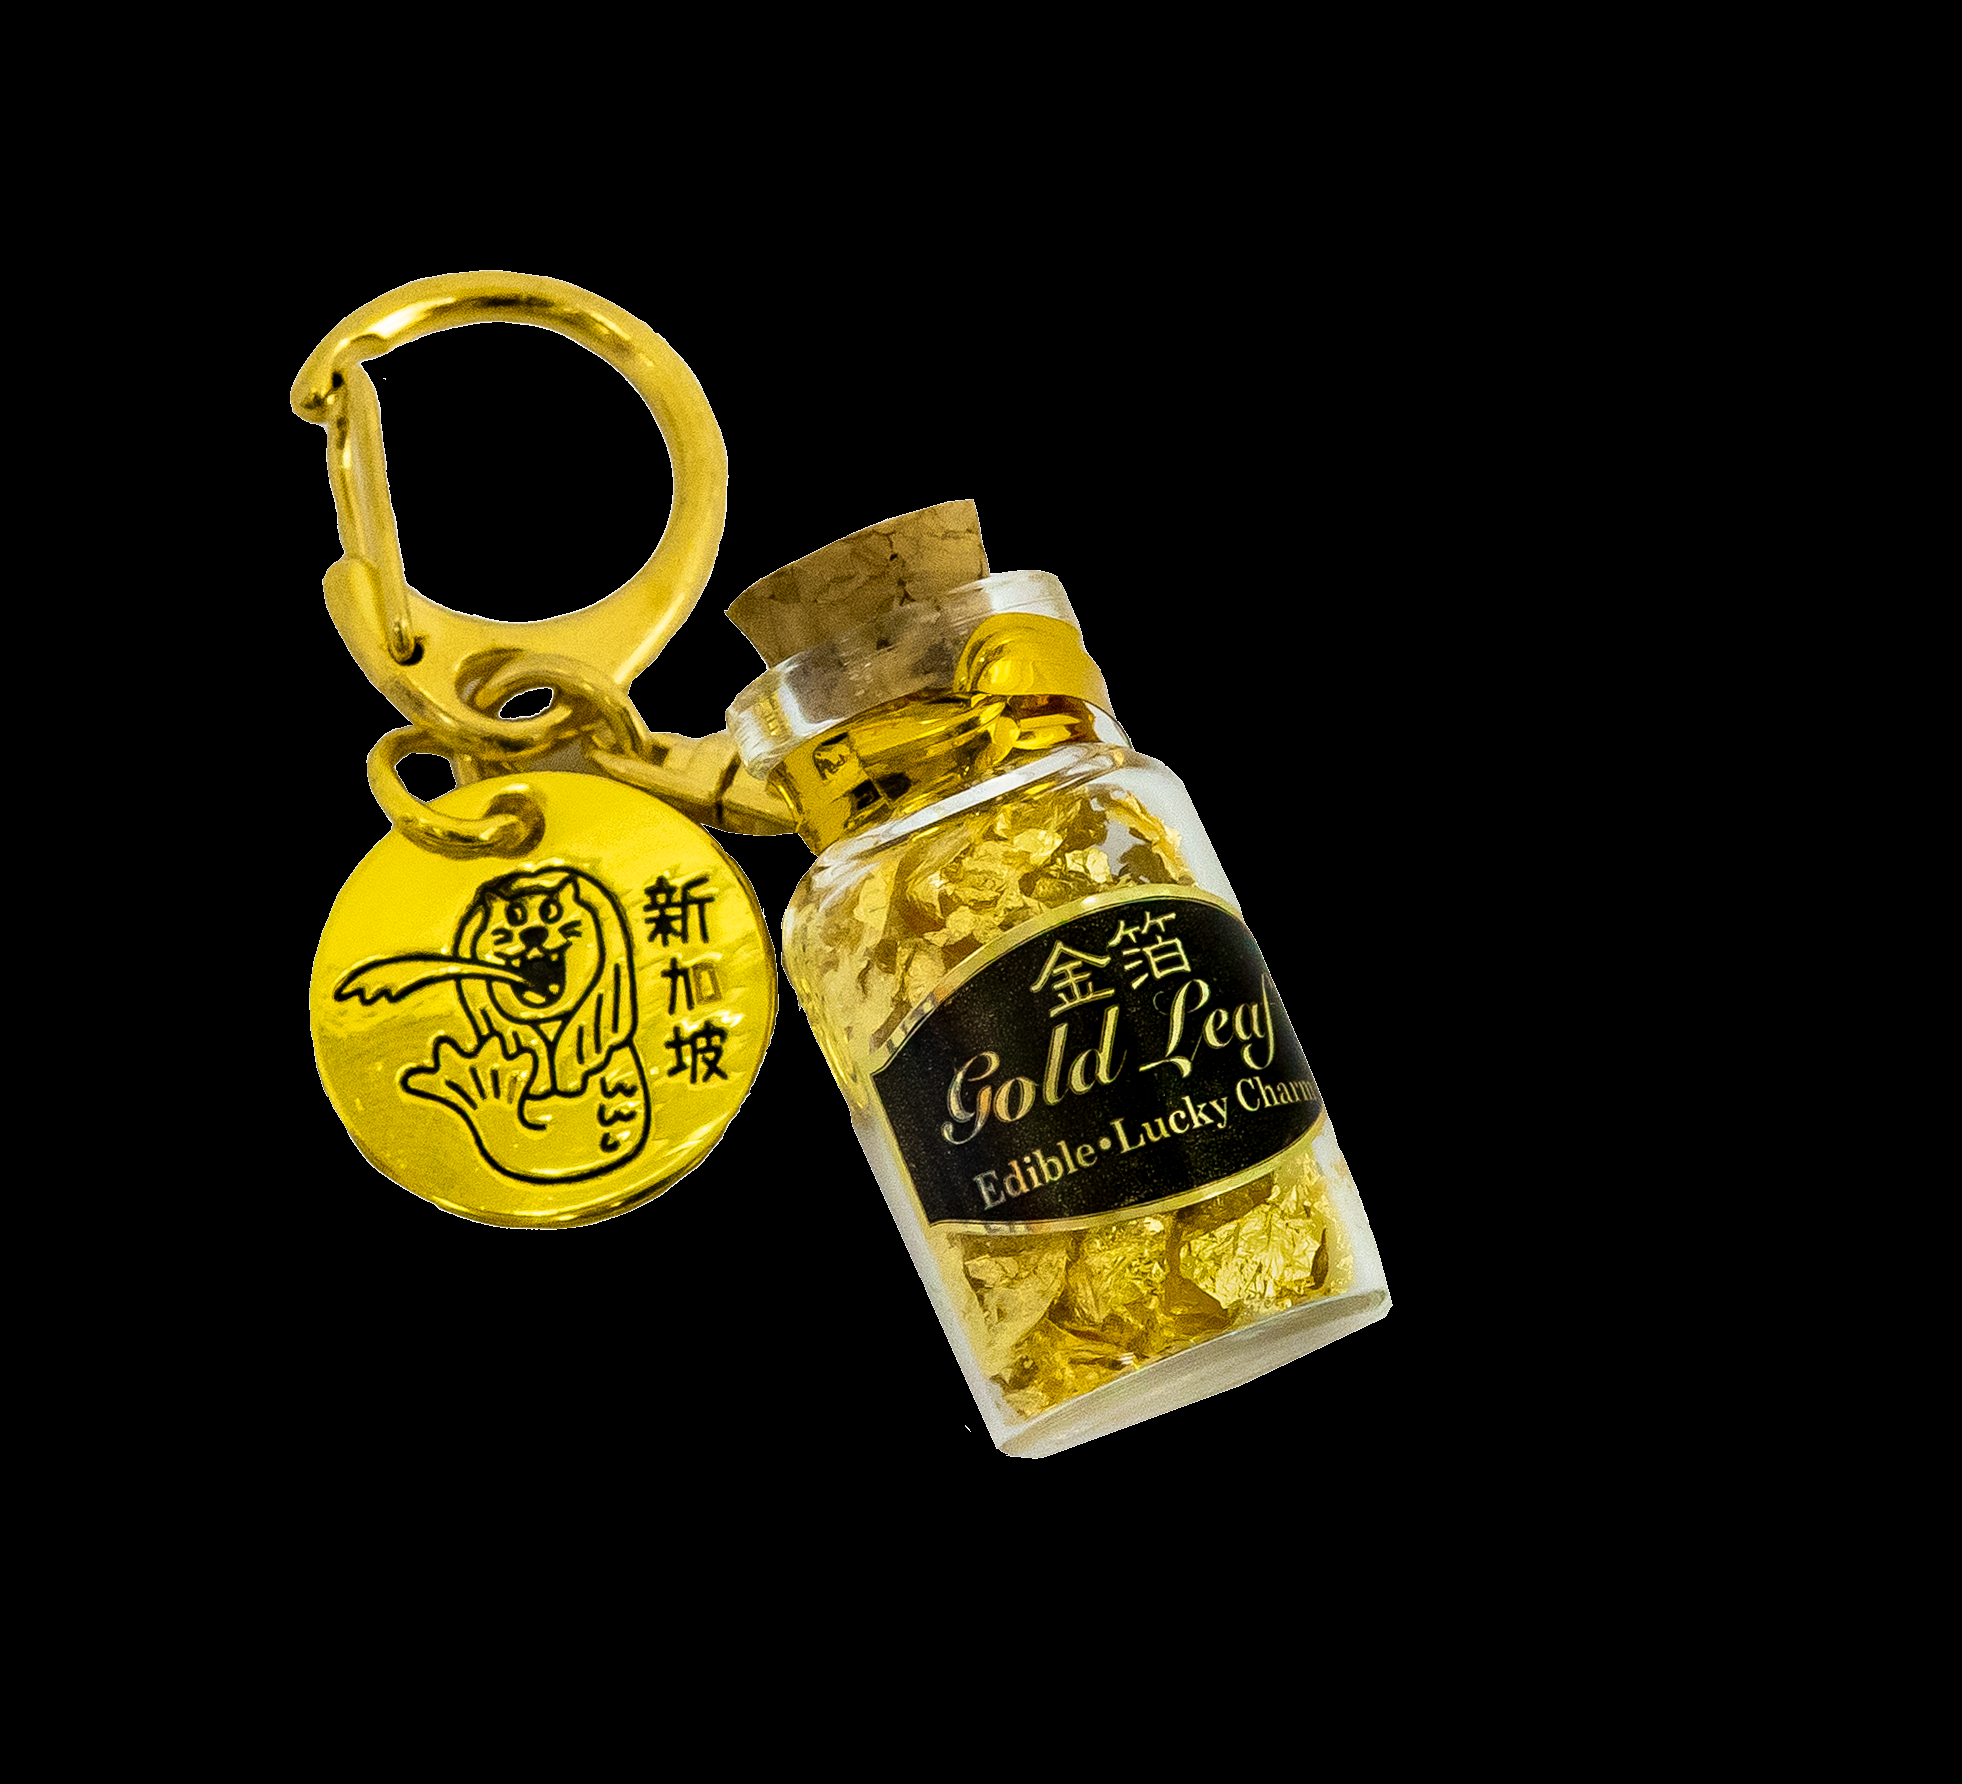 Gold leaf in a Small bottle (Blue Package)